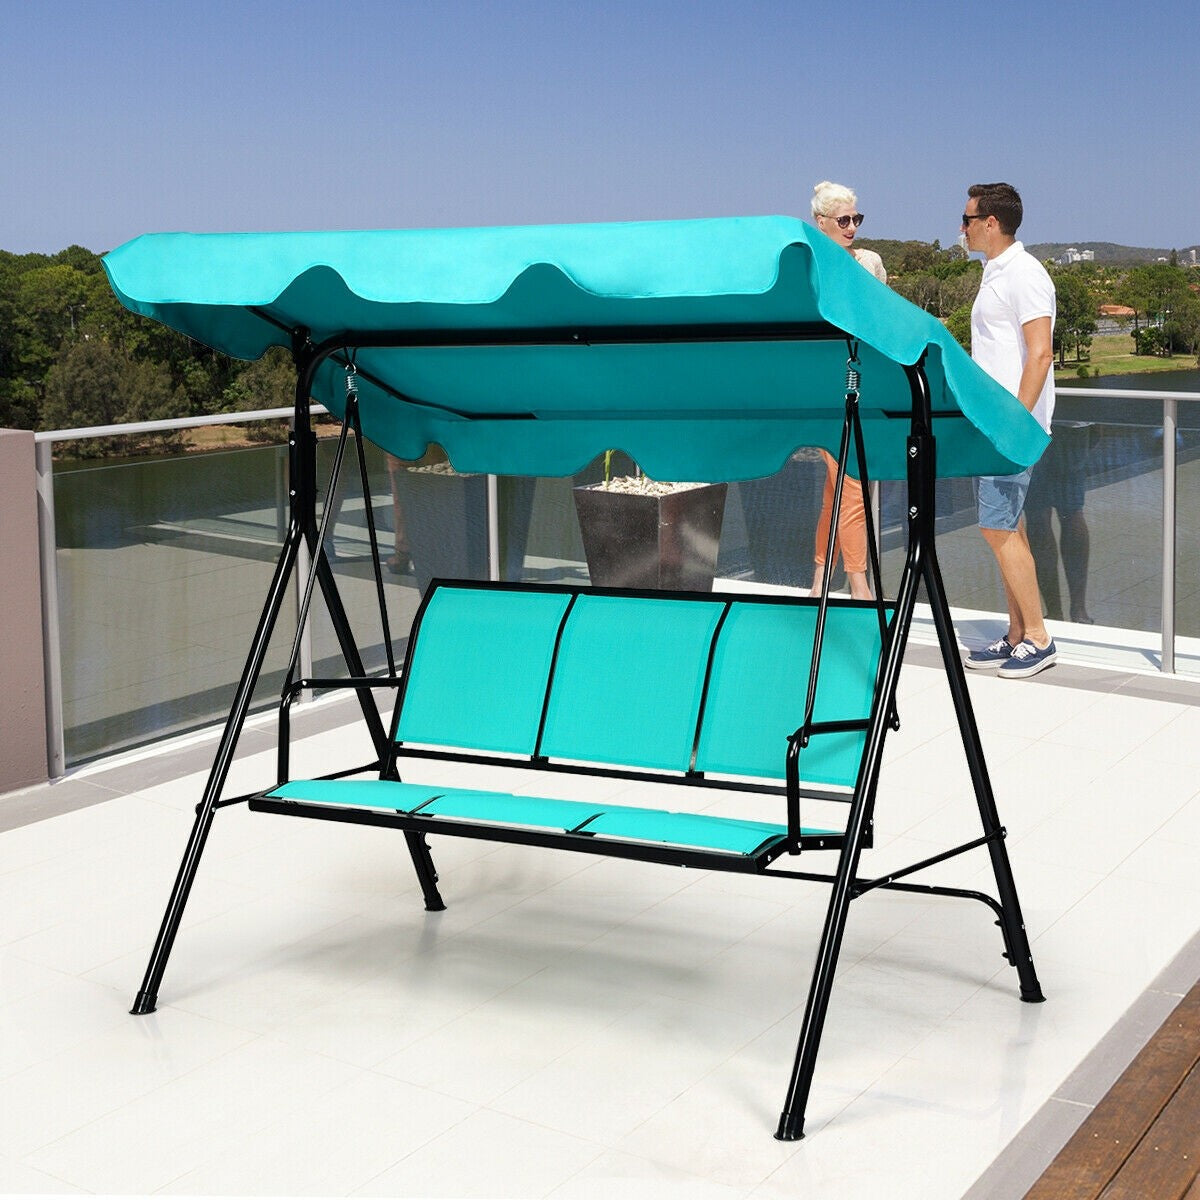 3 Seat Outdoor Patio Canopy Swing with Cushioned Steel Frame